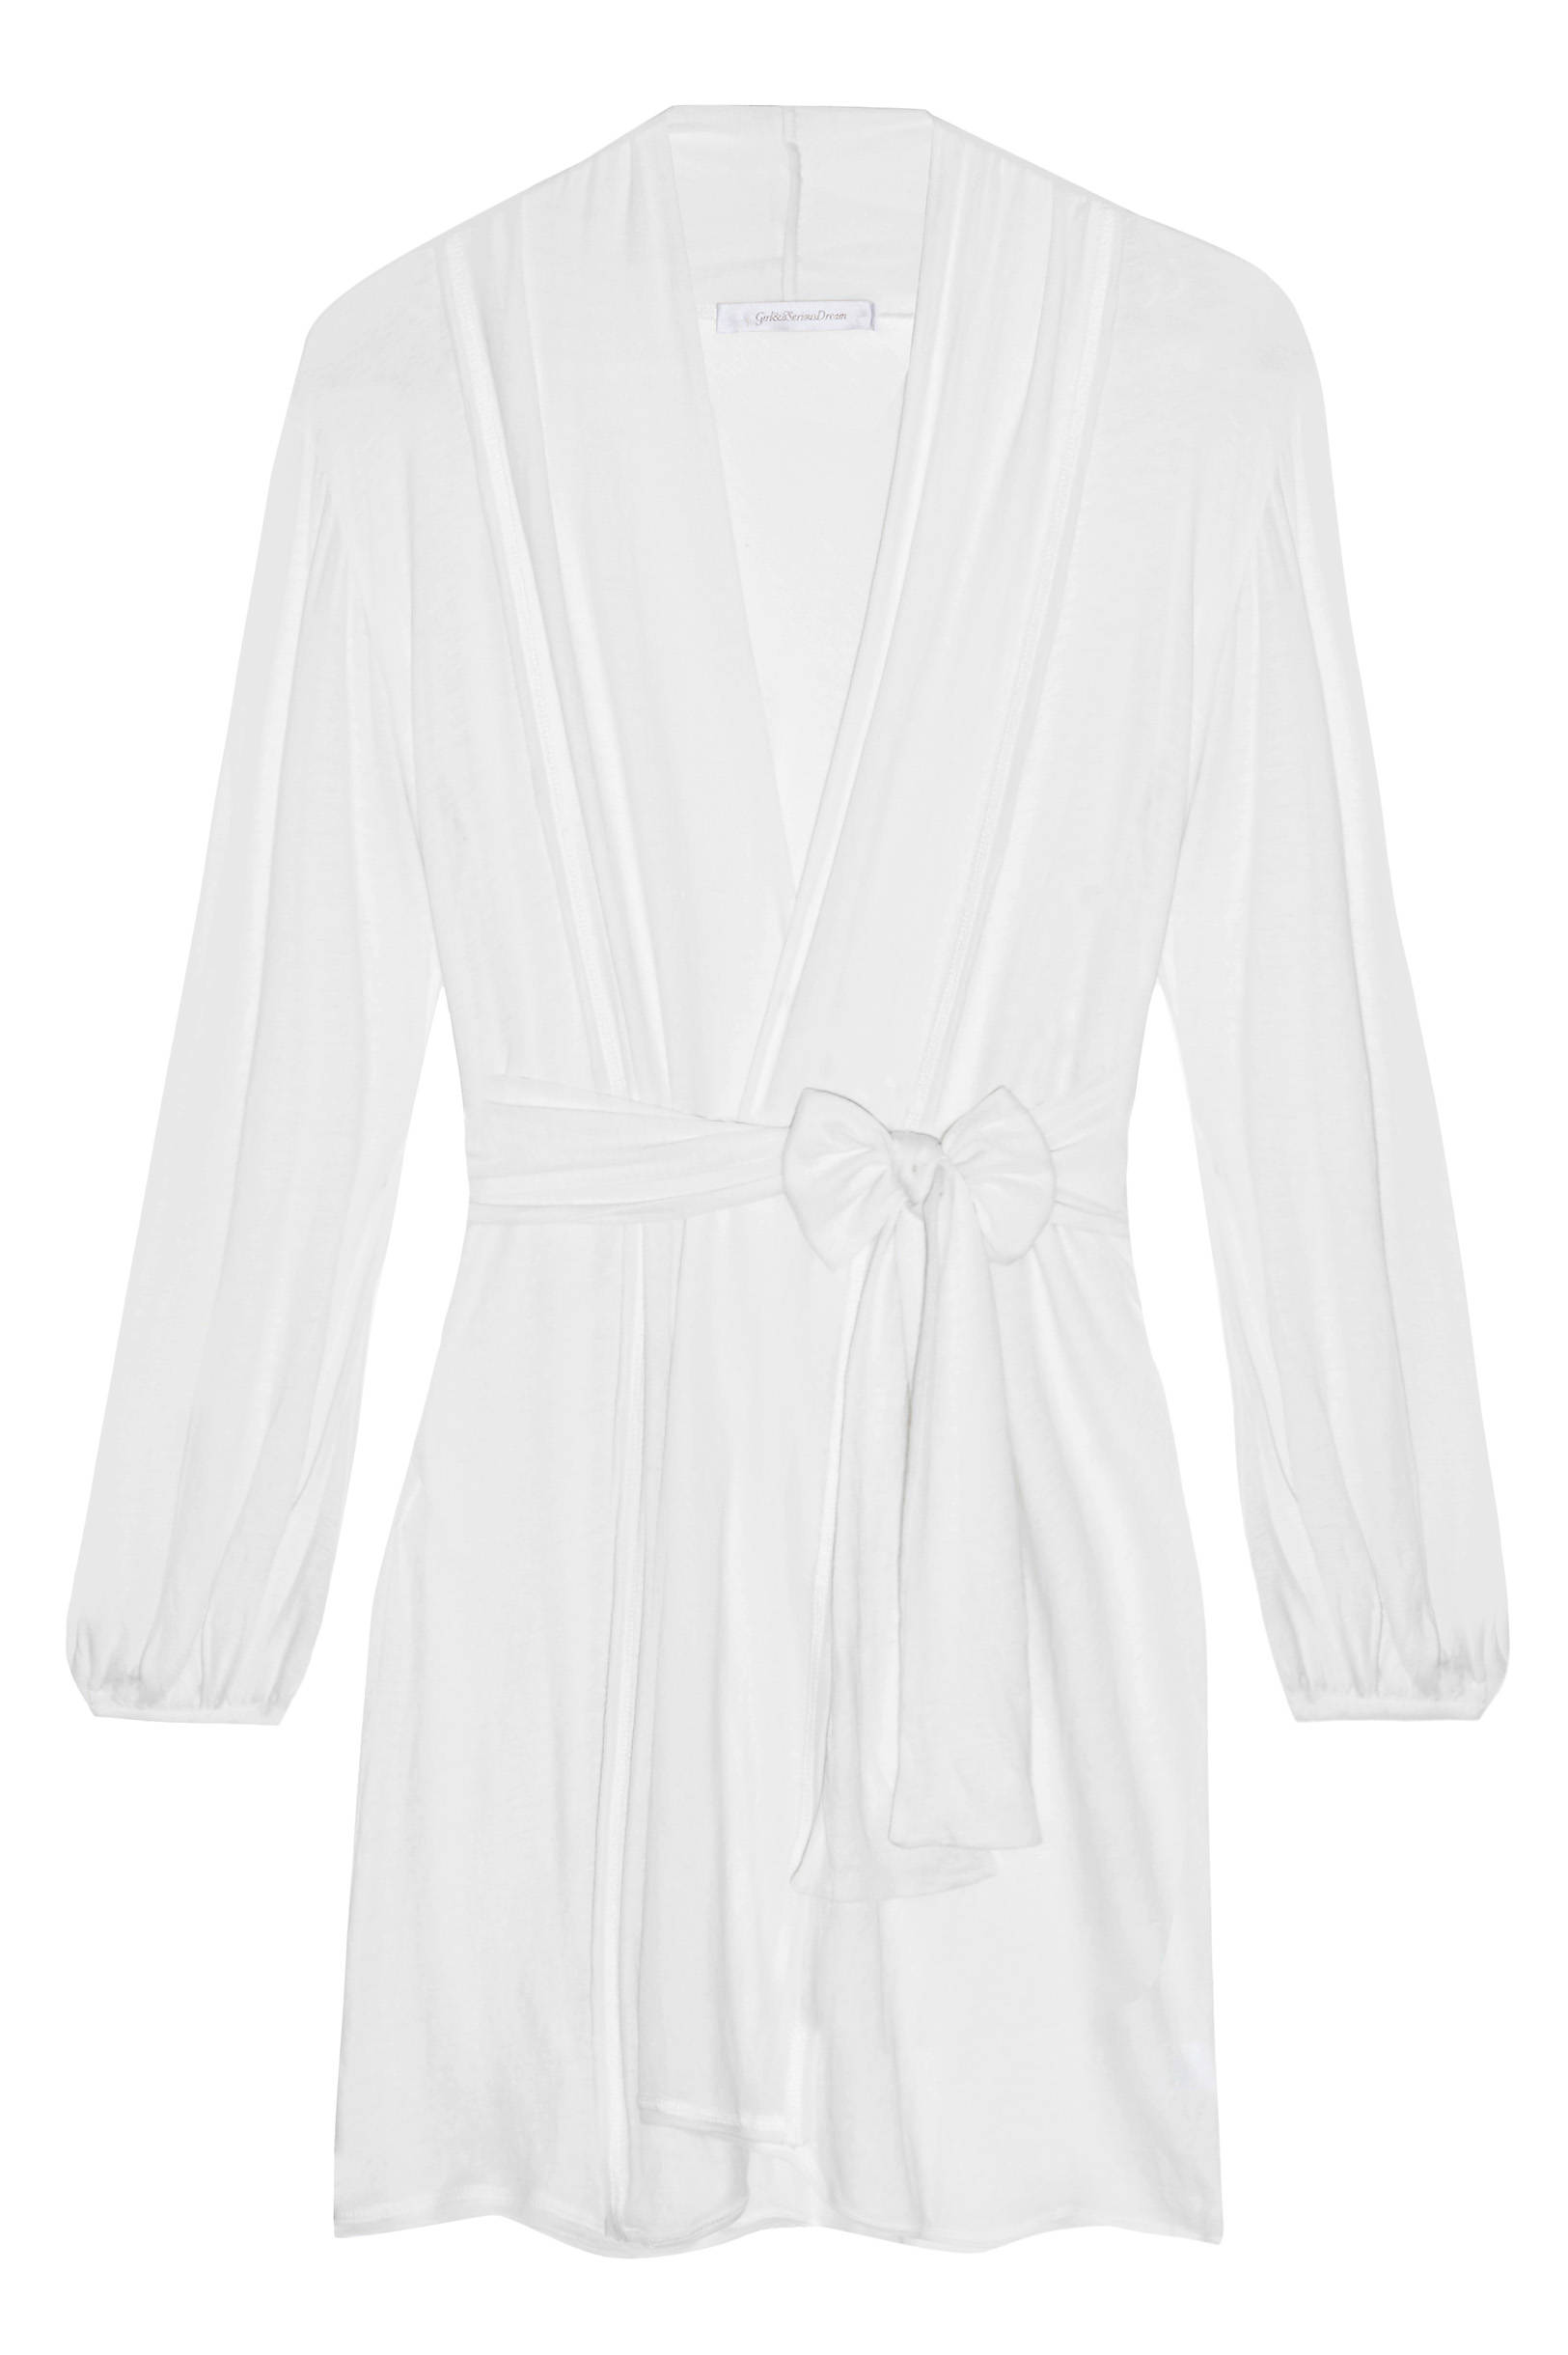 Pima Cotton Lounge Robe in Ivory Soft, Lightweight, 100% Cotton, Comfy ...